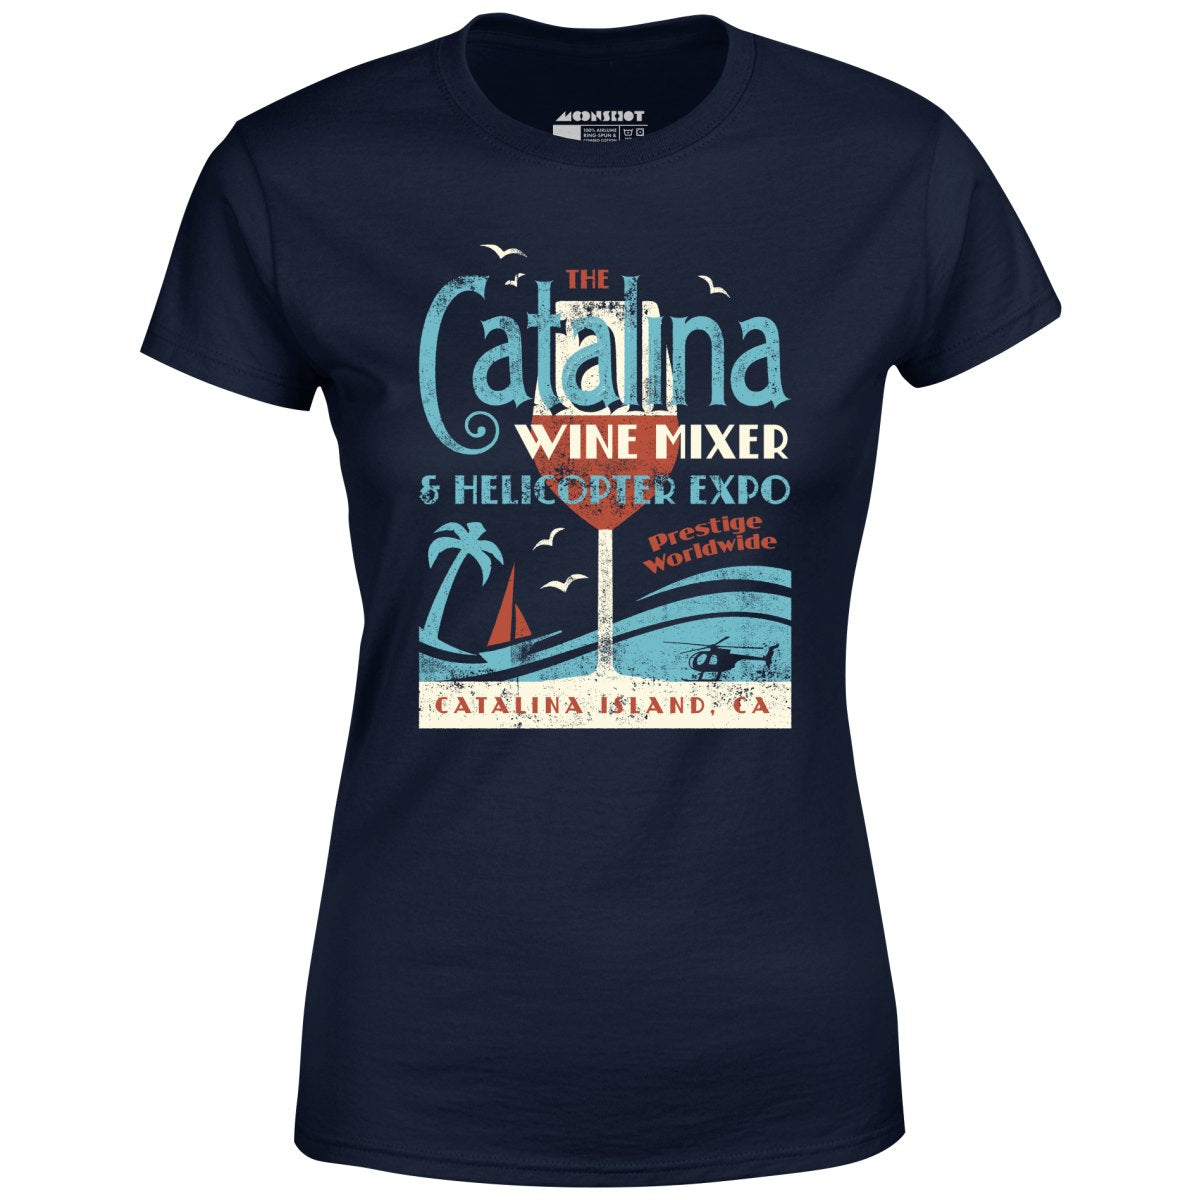 The Catalina Wine Mixer & Helicopter Expo - Women's T-Shirt